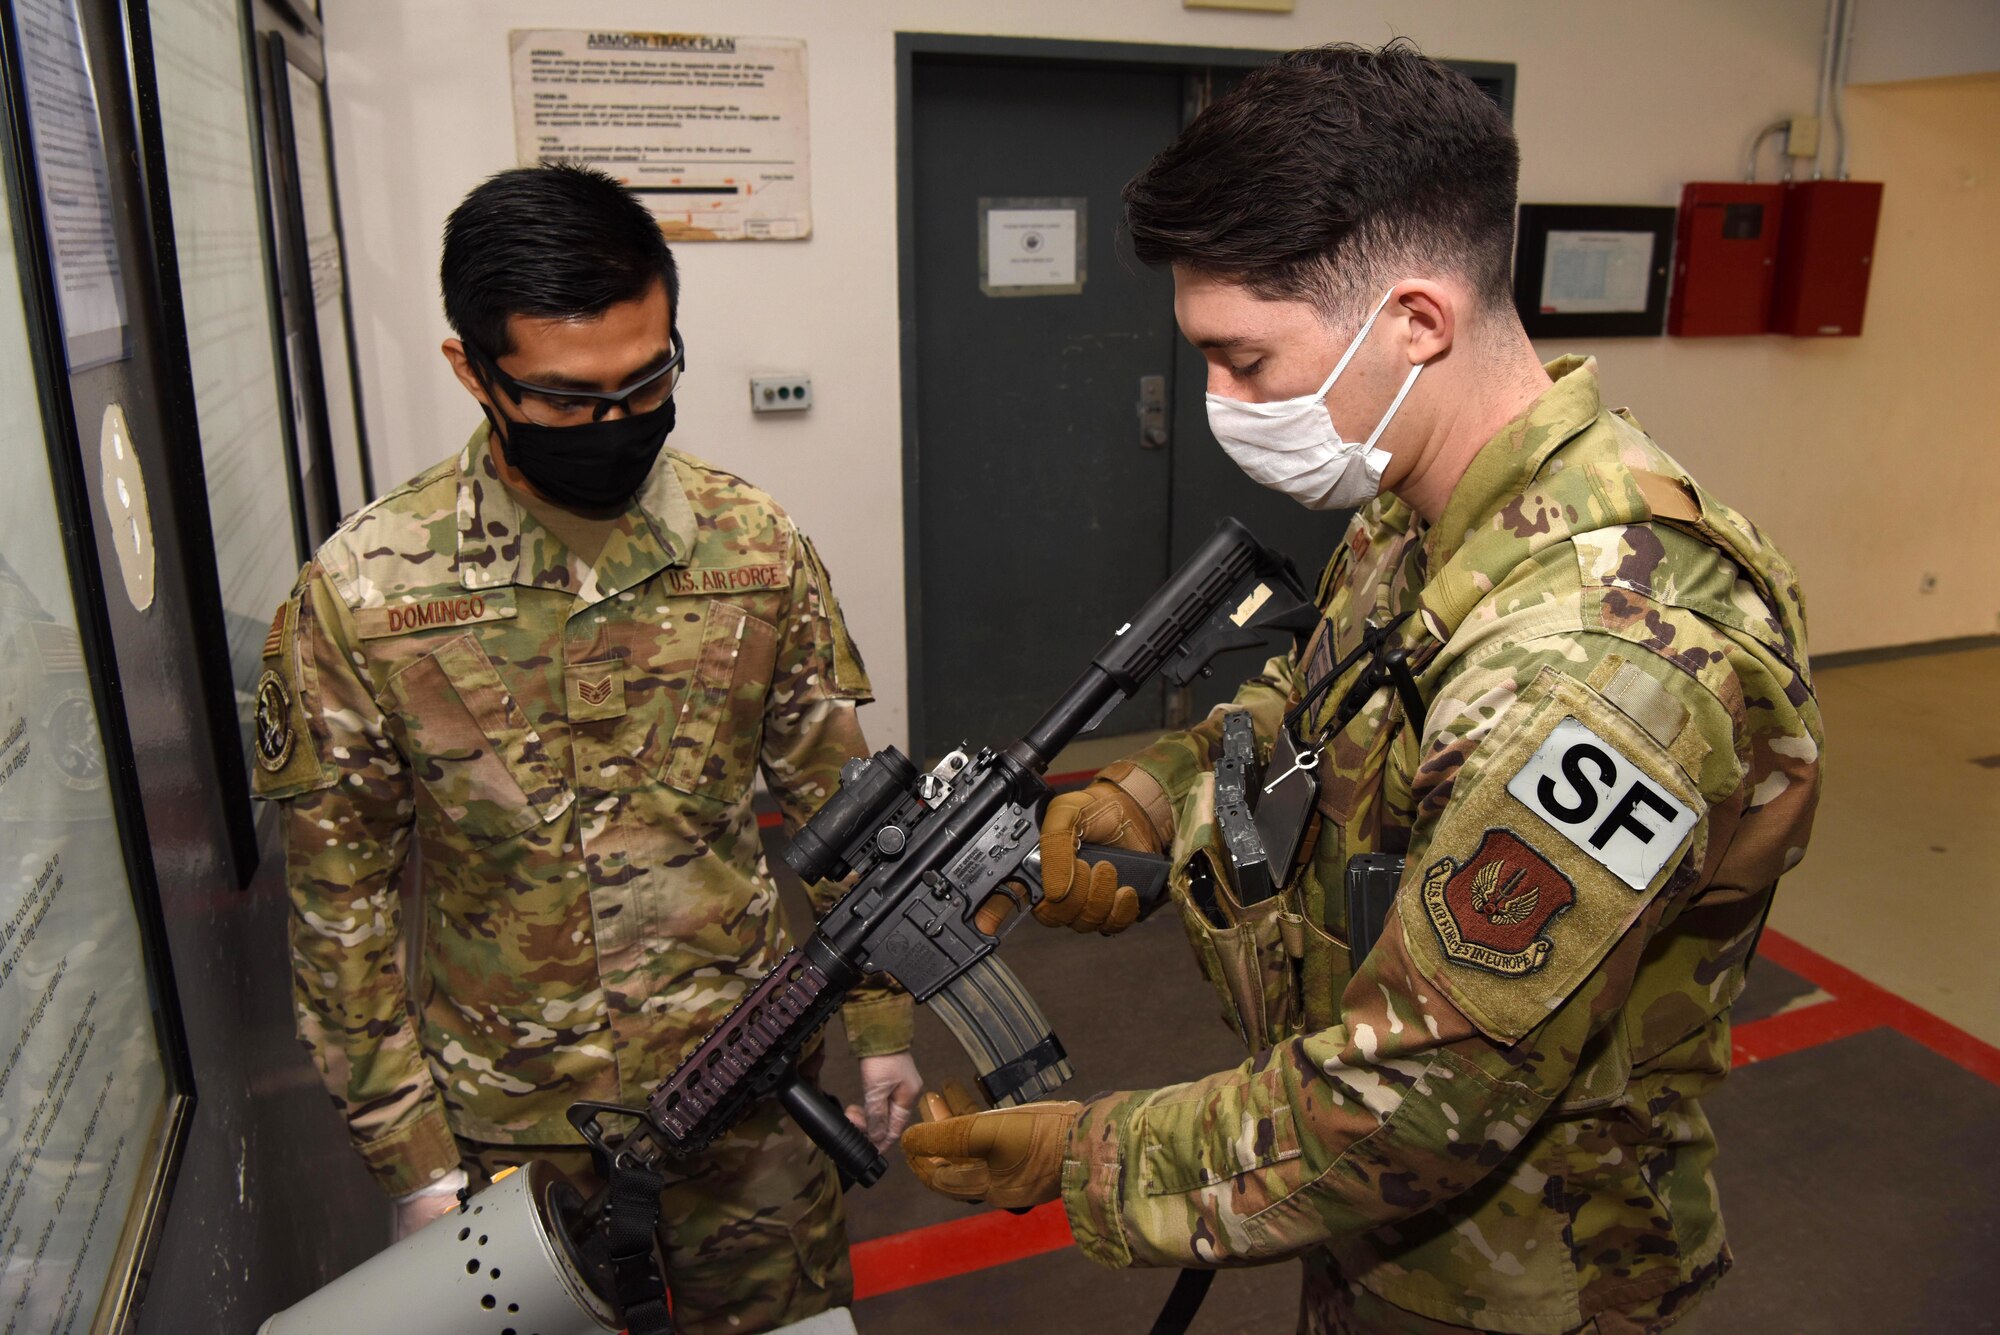 U.S. Air Force Staff Sgt. Jesse Domingo, 39th Security Forces Squadron Armory NCO in charge, arms Senior Airman Daniel Gutierrez, 39th SFS Security Response Team member, April 14, 2020, on Incirlik Air Base, Turkey. The Armory is in charge of arming and de-arming all members of the 39th SFS. (U.S. Air Force photo by Tech. Sgt. Jim Araos)